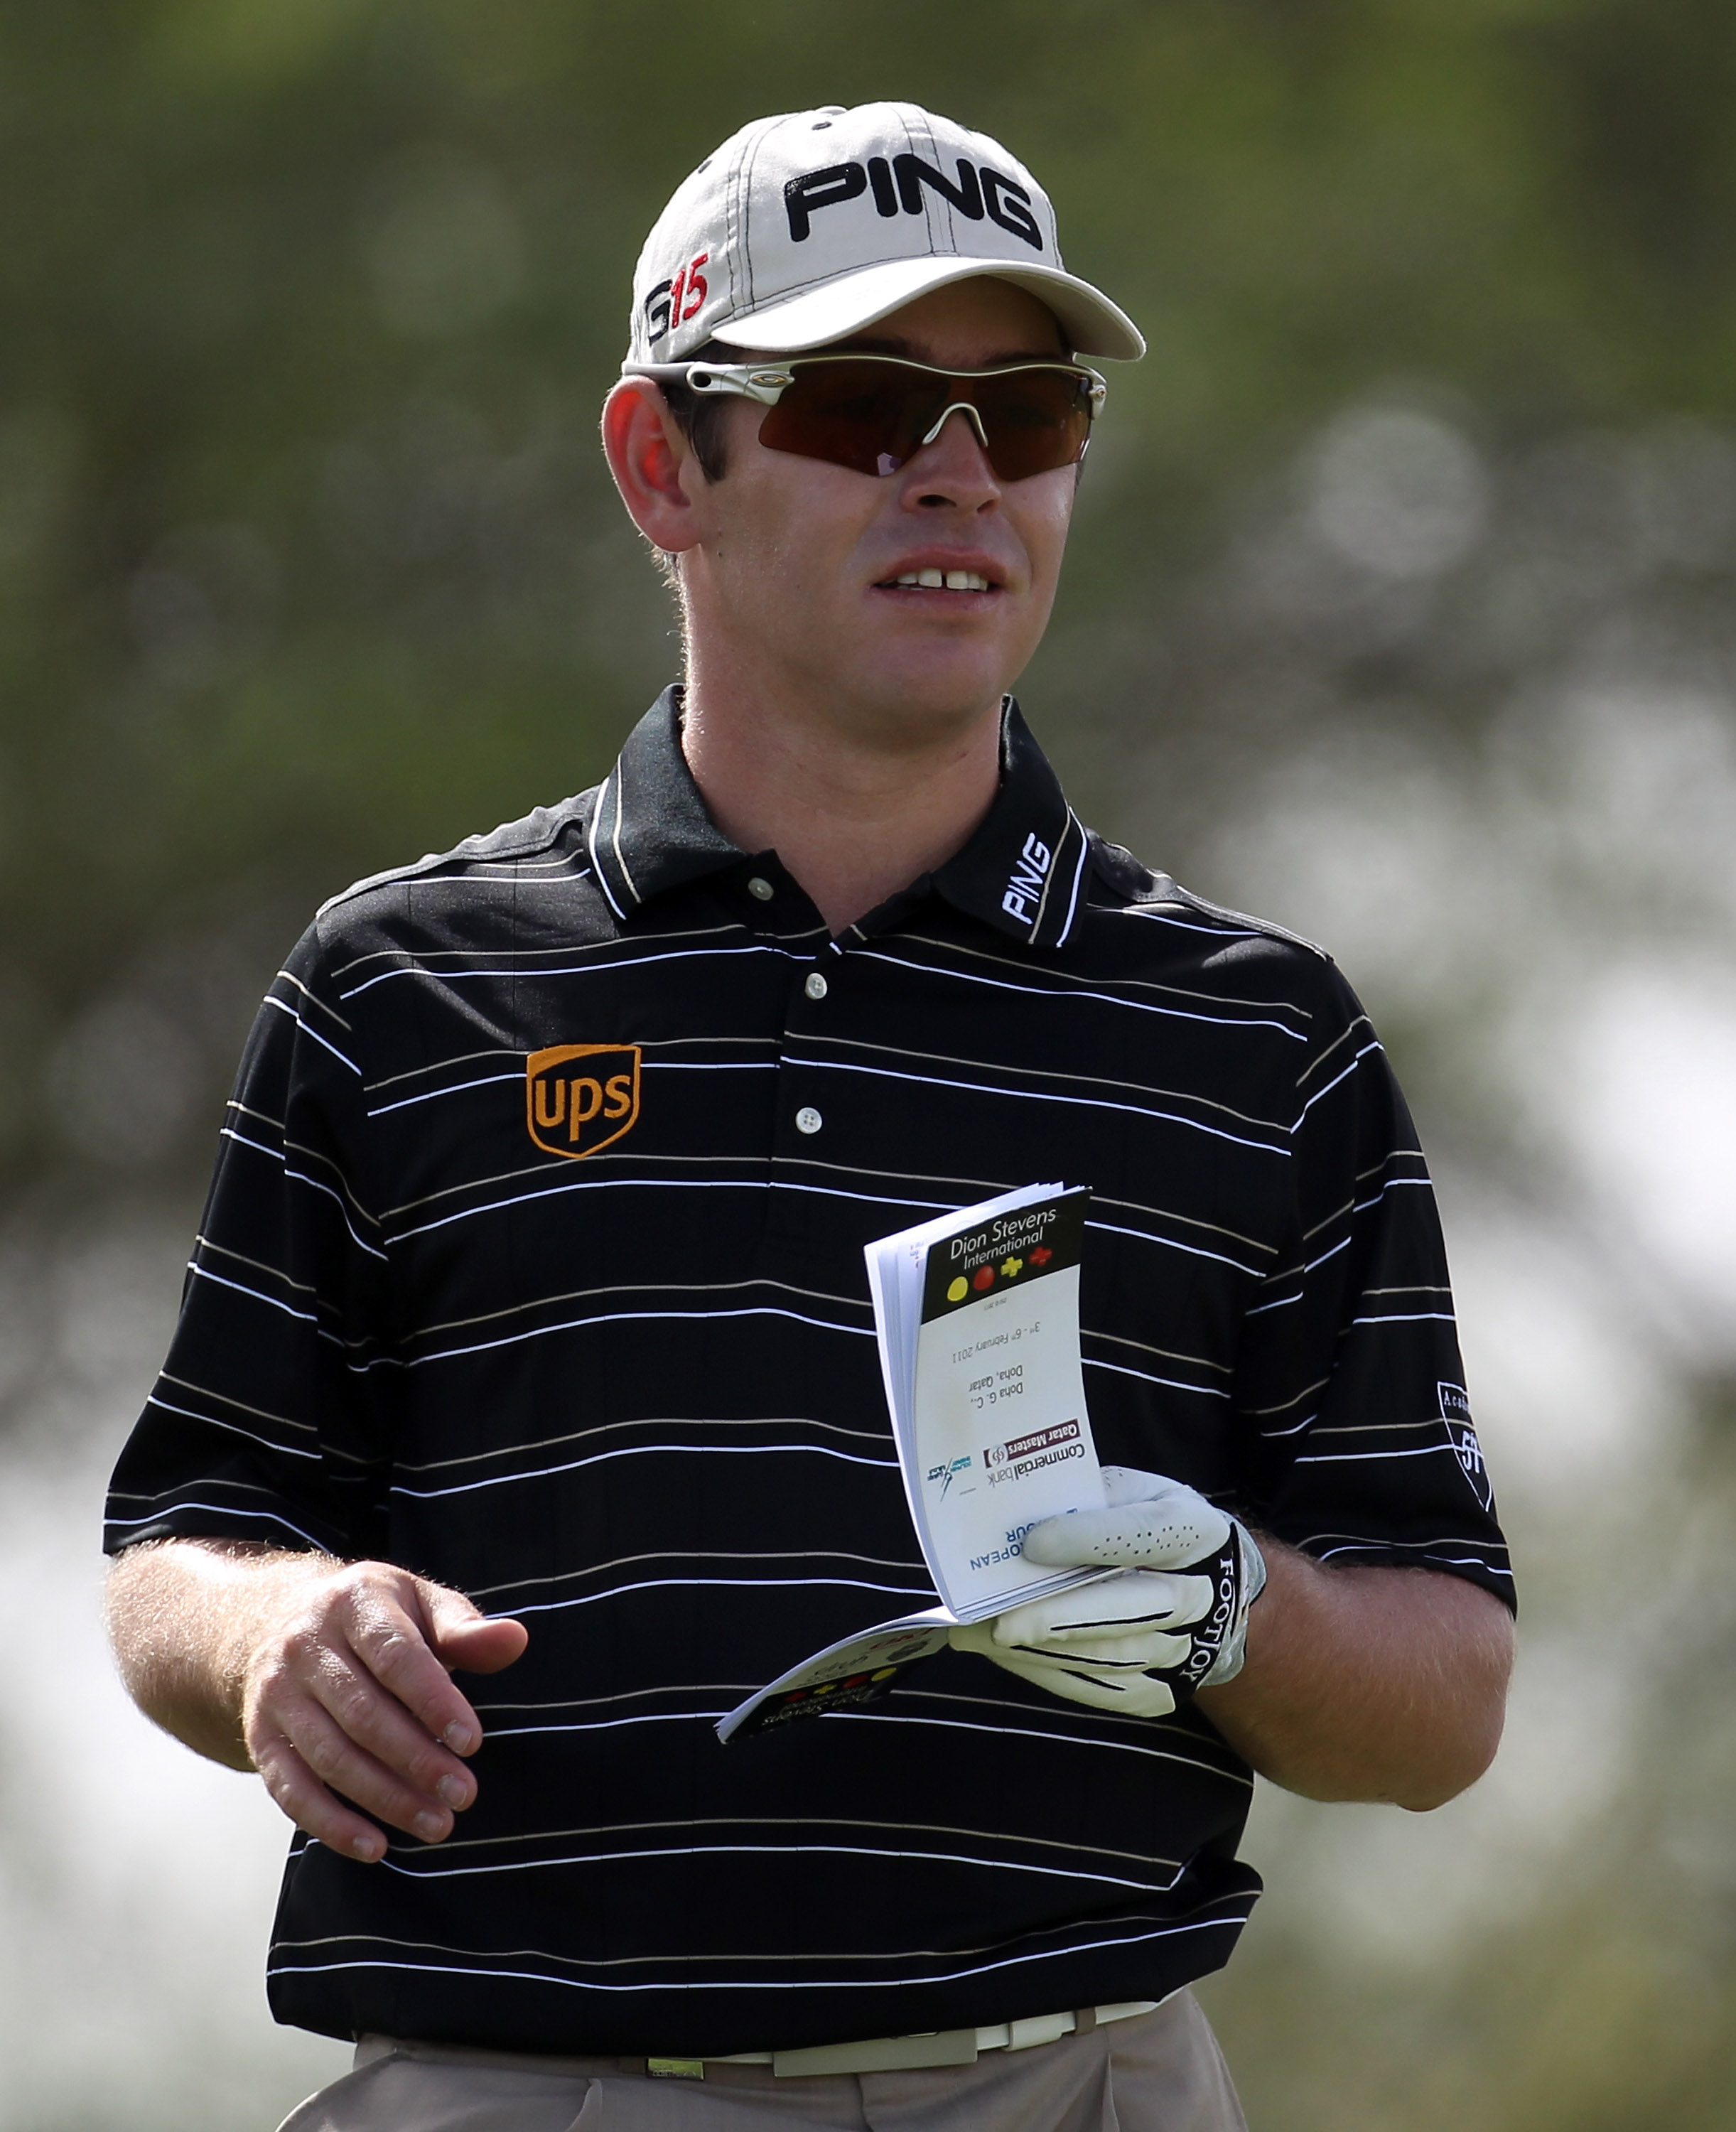 DOHA, QATAR - FEBRUARY 05:  Louis Oosthuizen of South Africa during the third round of the Commercialbank Qatar Masters at the Doha Golf Club on February 5, 2011 in Doha, Qatar.  (Photo by Ross Kinnaird/Getty Images)